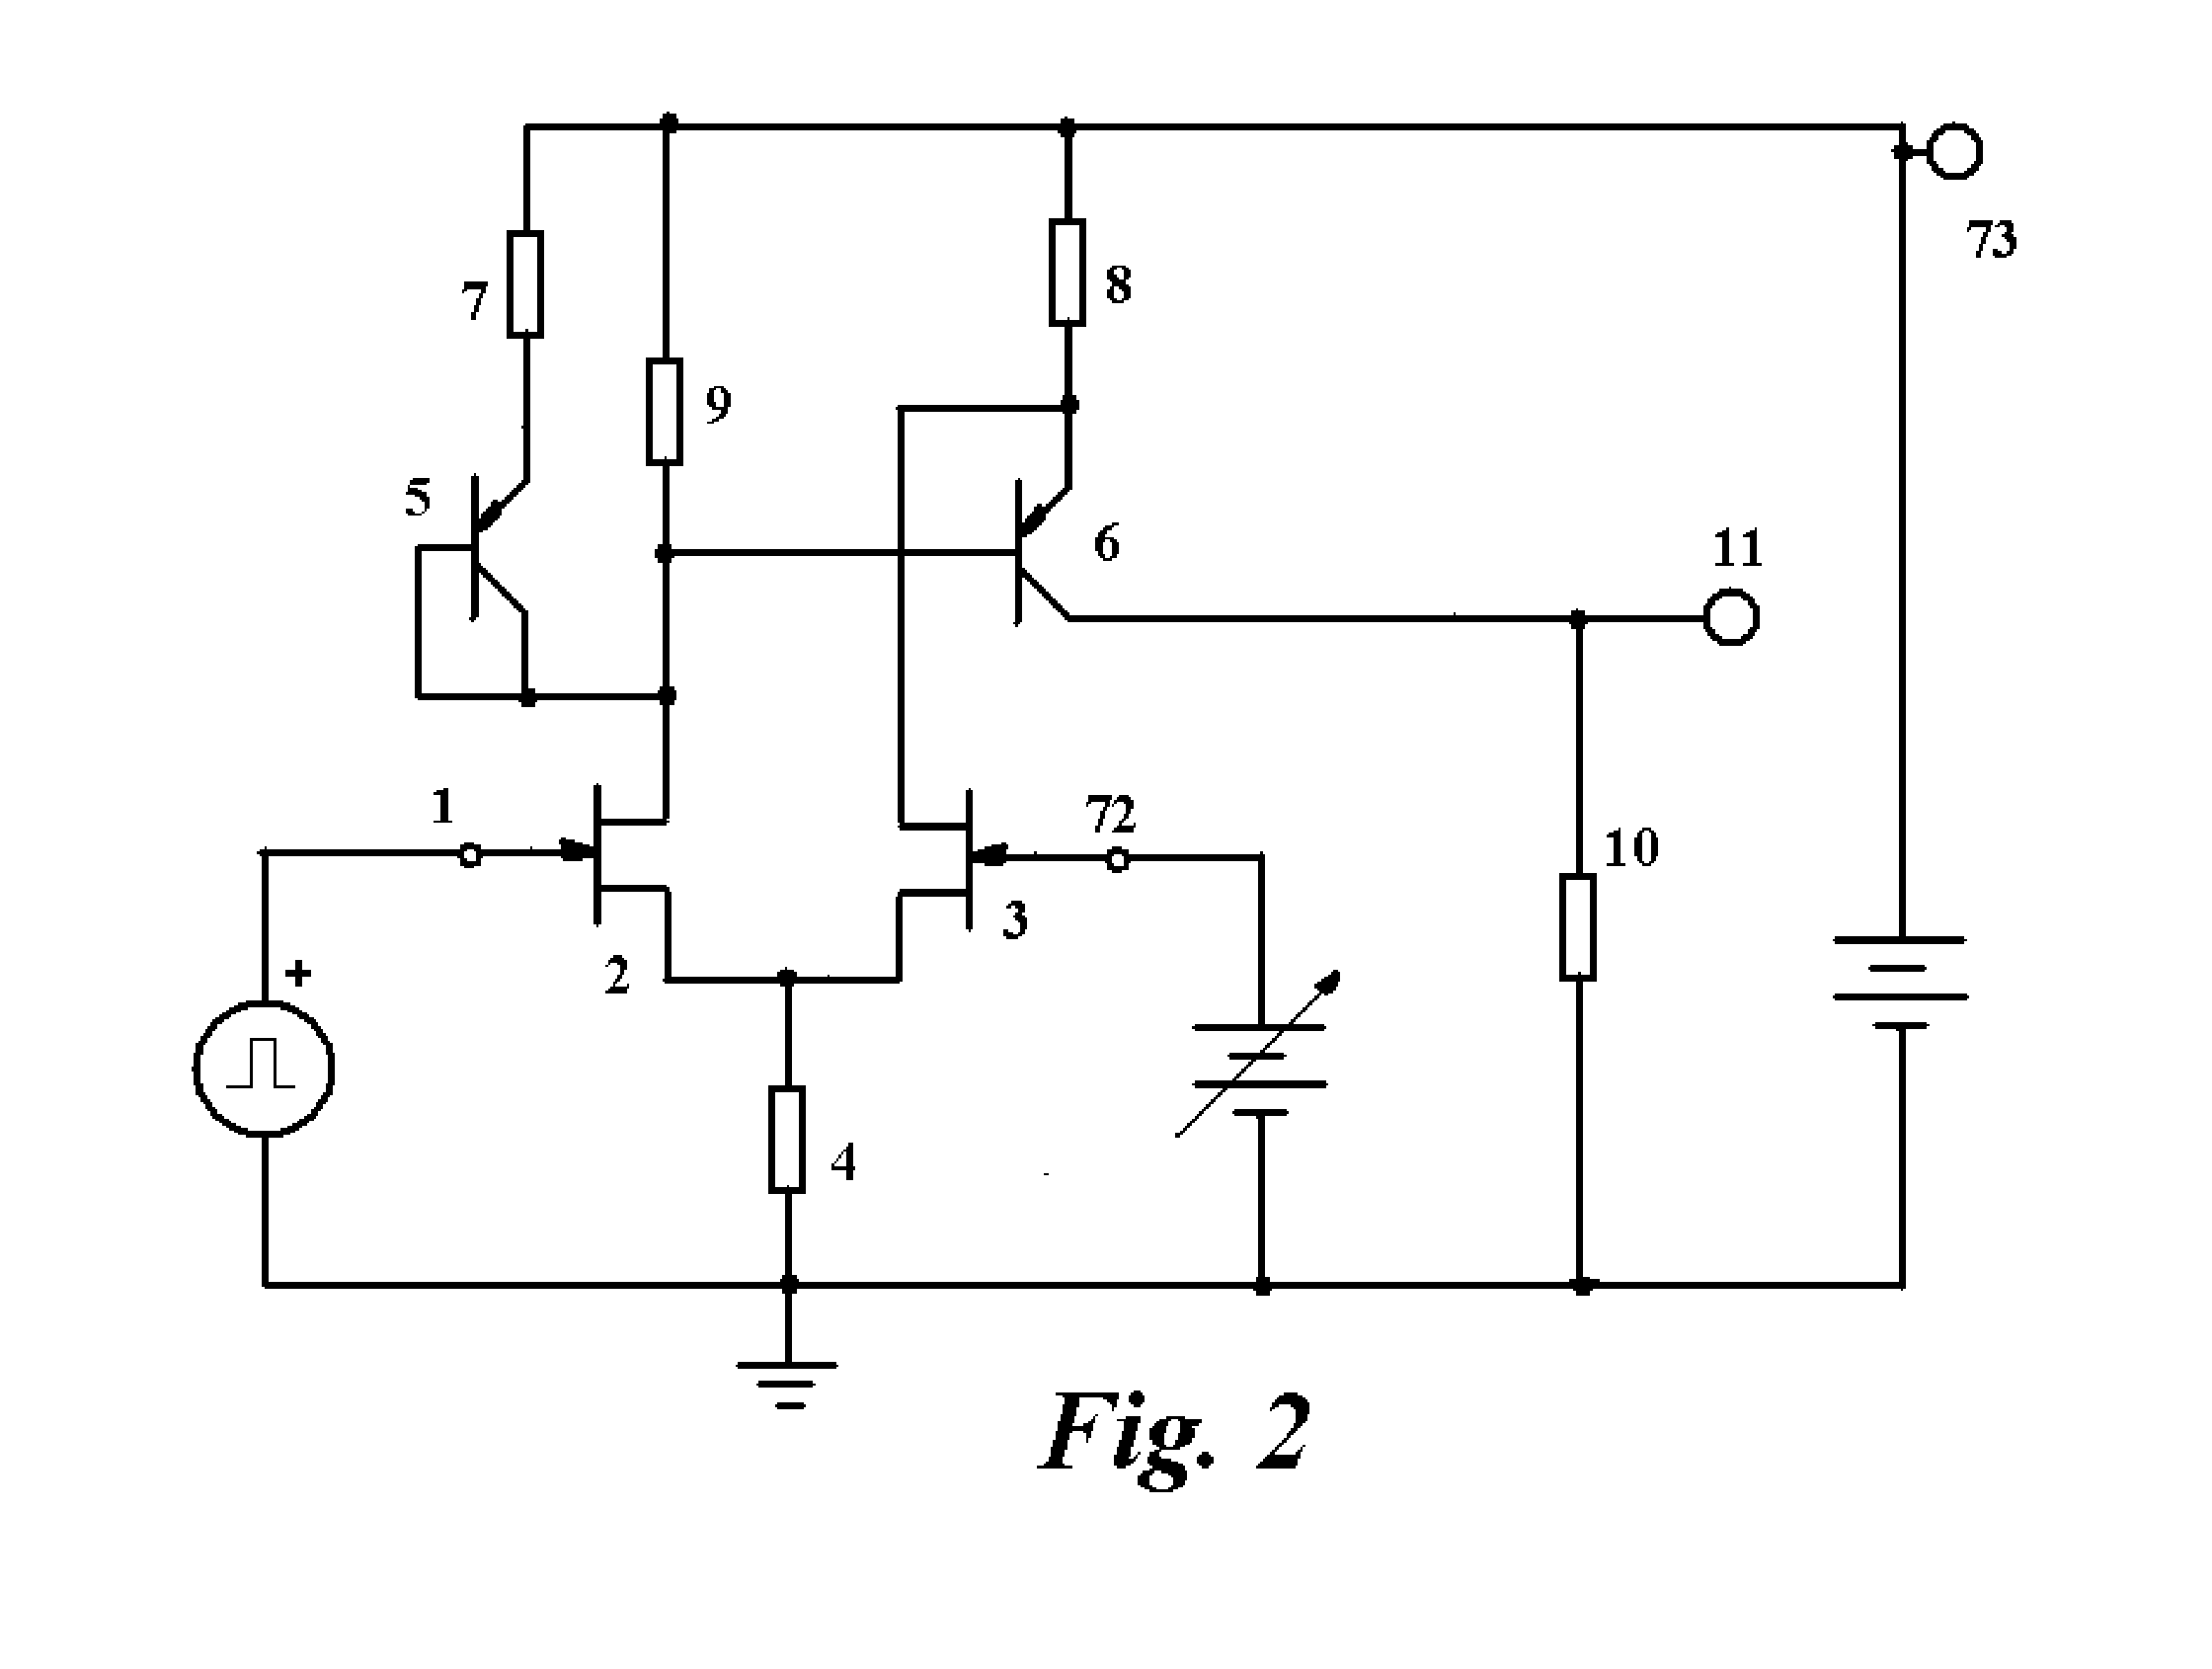 Method and Apparatus for Extending a Scintillation Counter's Dynamic Range